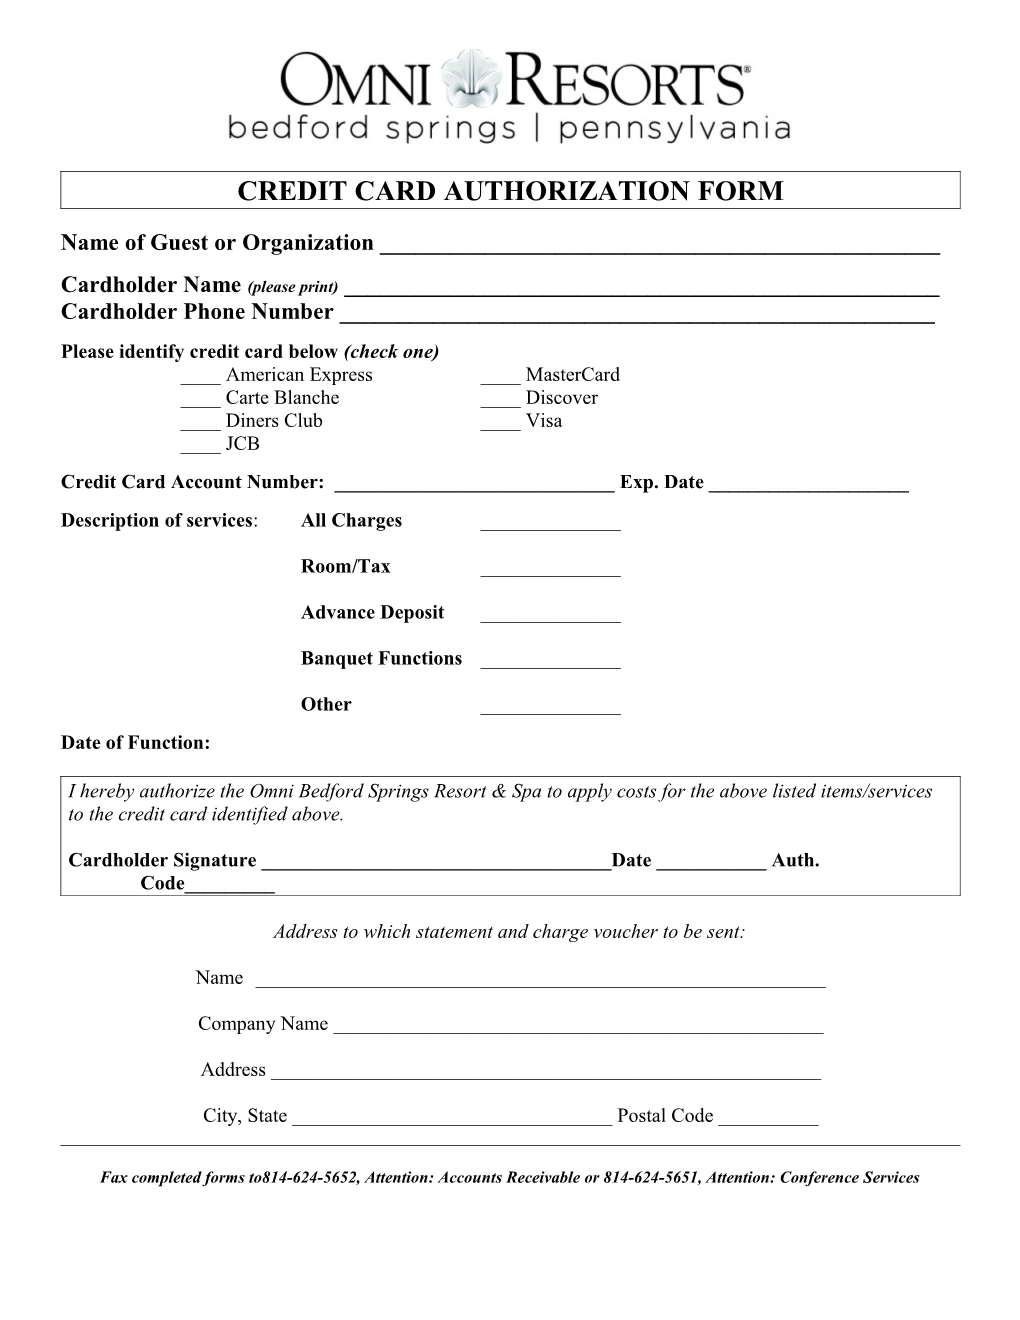 CREDIT CARD AUTHORIZATION FORM Name of Guest Or Organization ______ Cardholder Name (Please